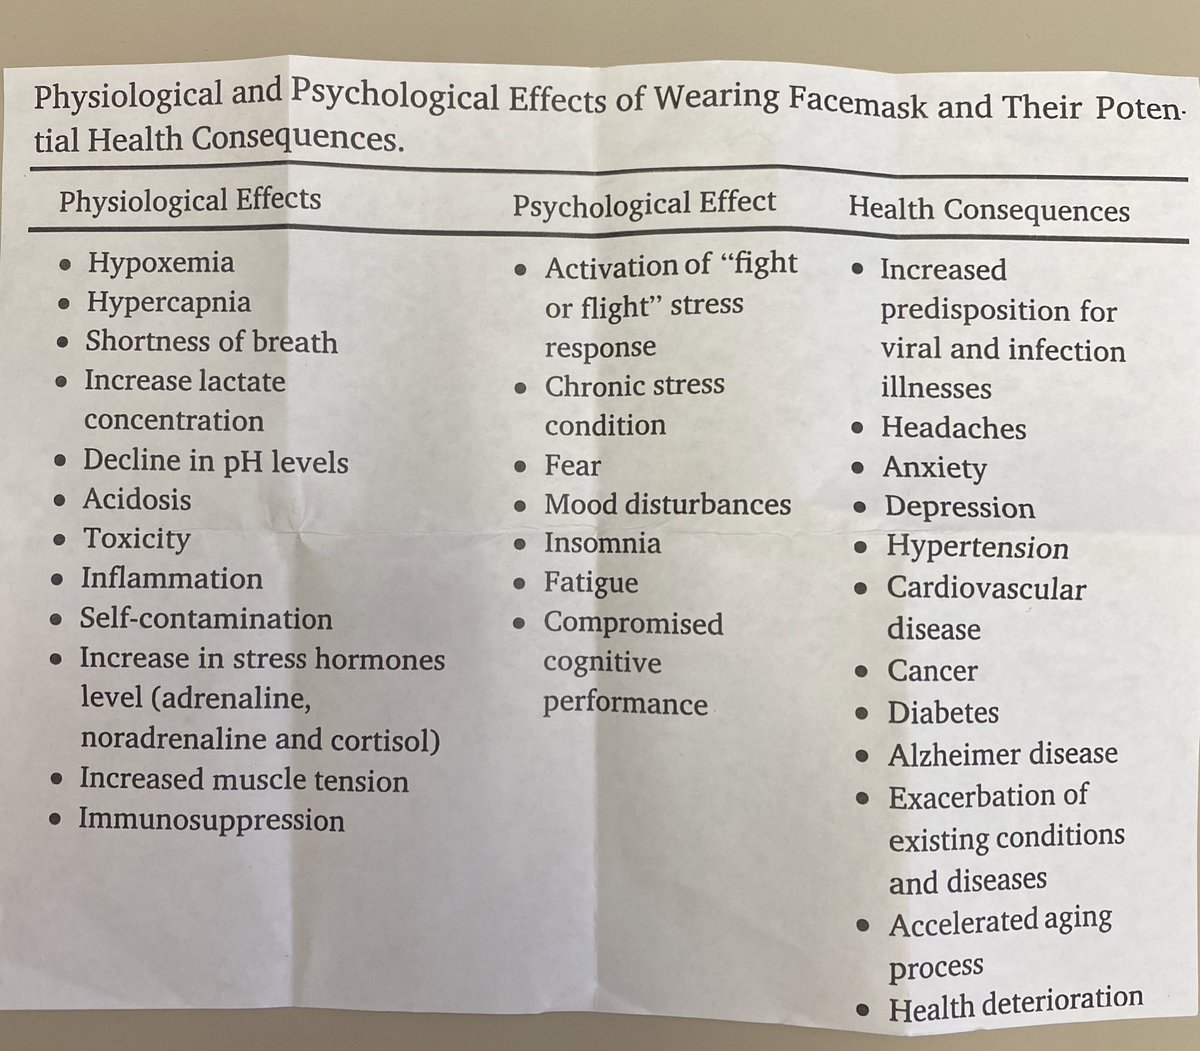 Here is what anti-mask protesters were handing out today at an elementary school. It’s a list of “physiological and psychological effects” of masks, including:- fear- cancer- accelerated aging process